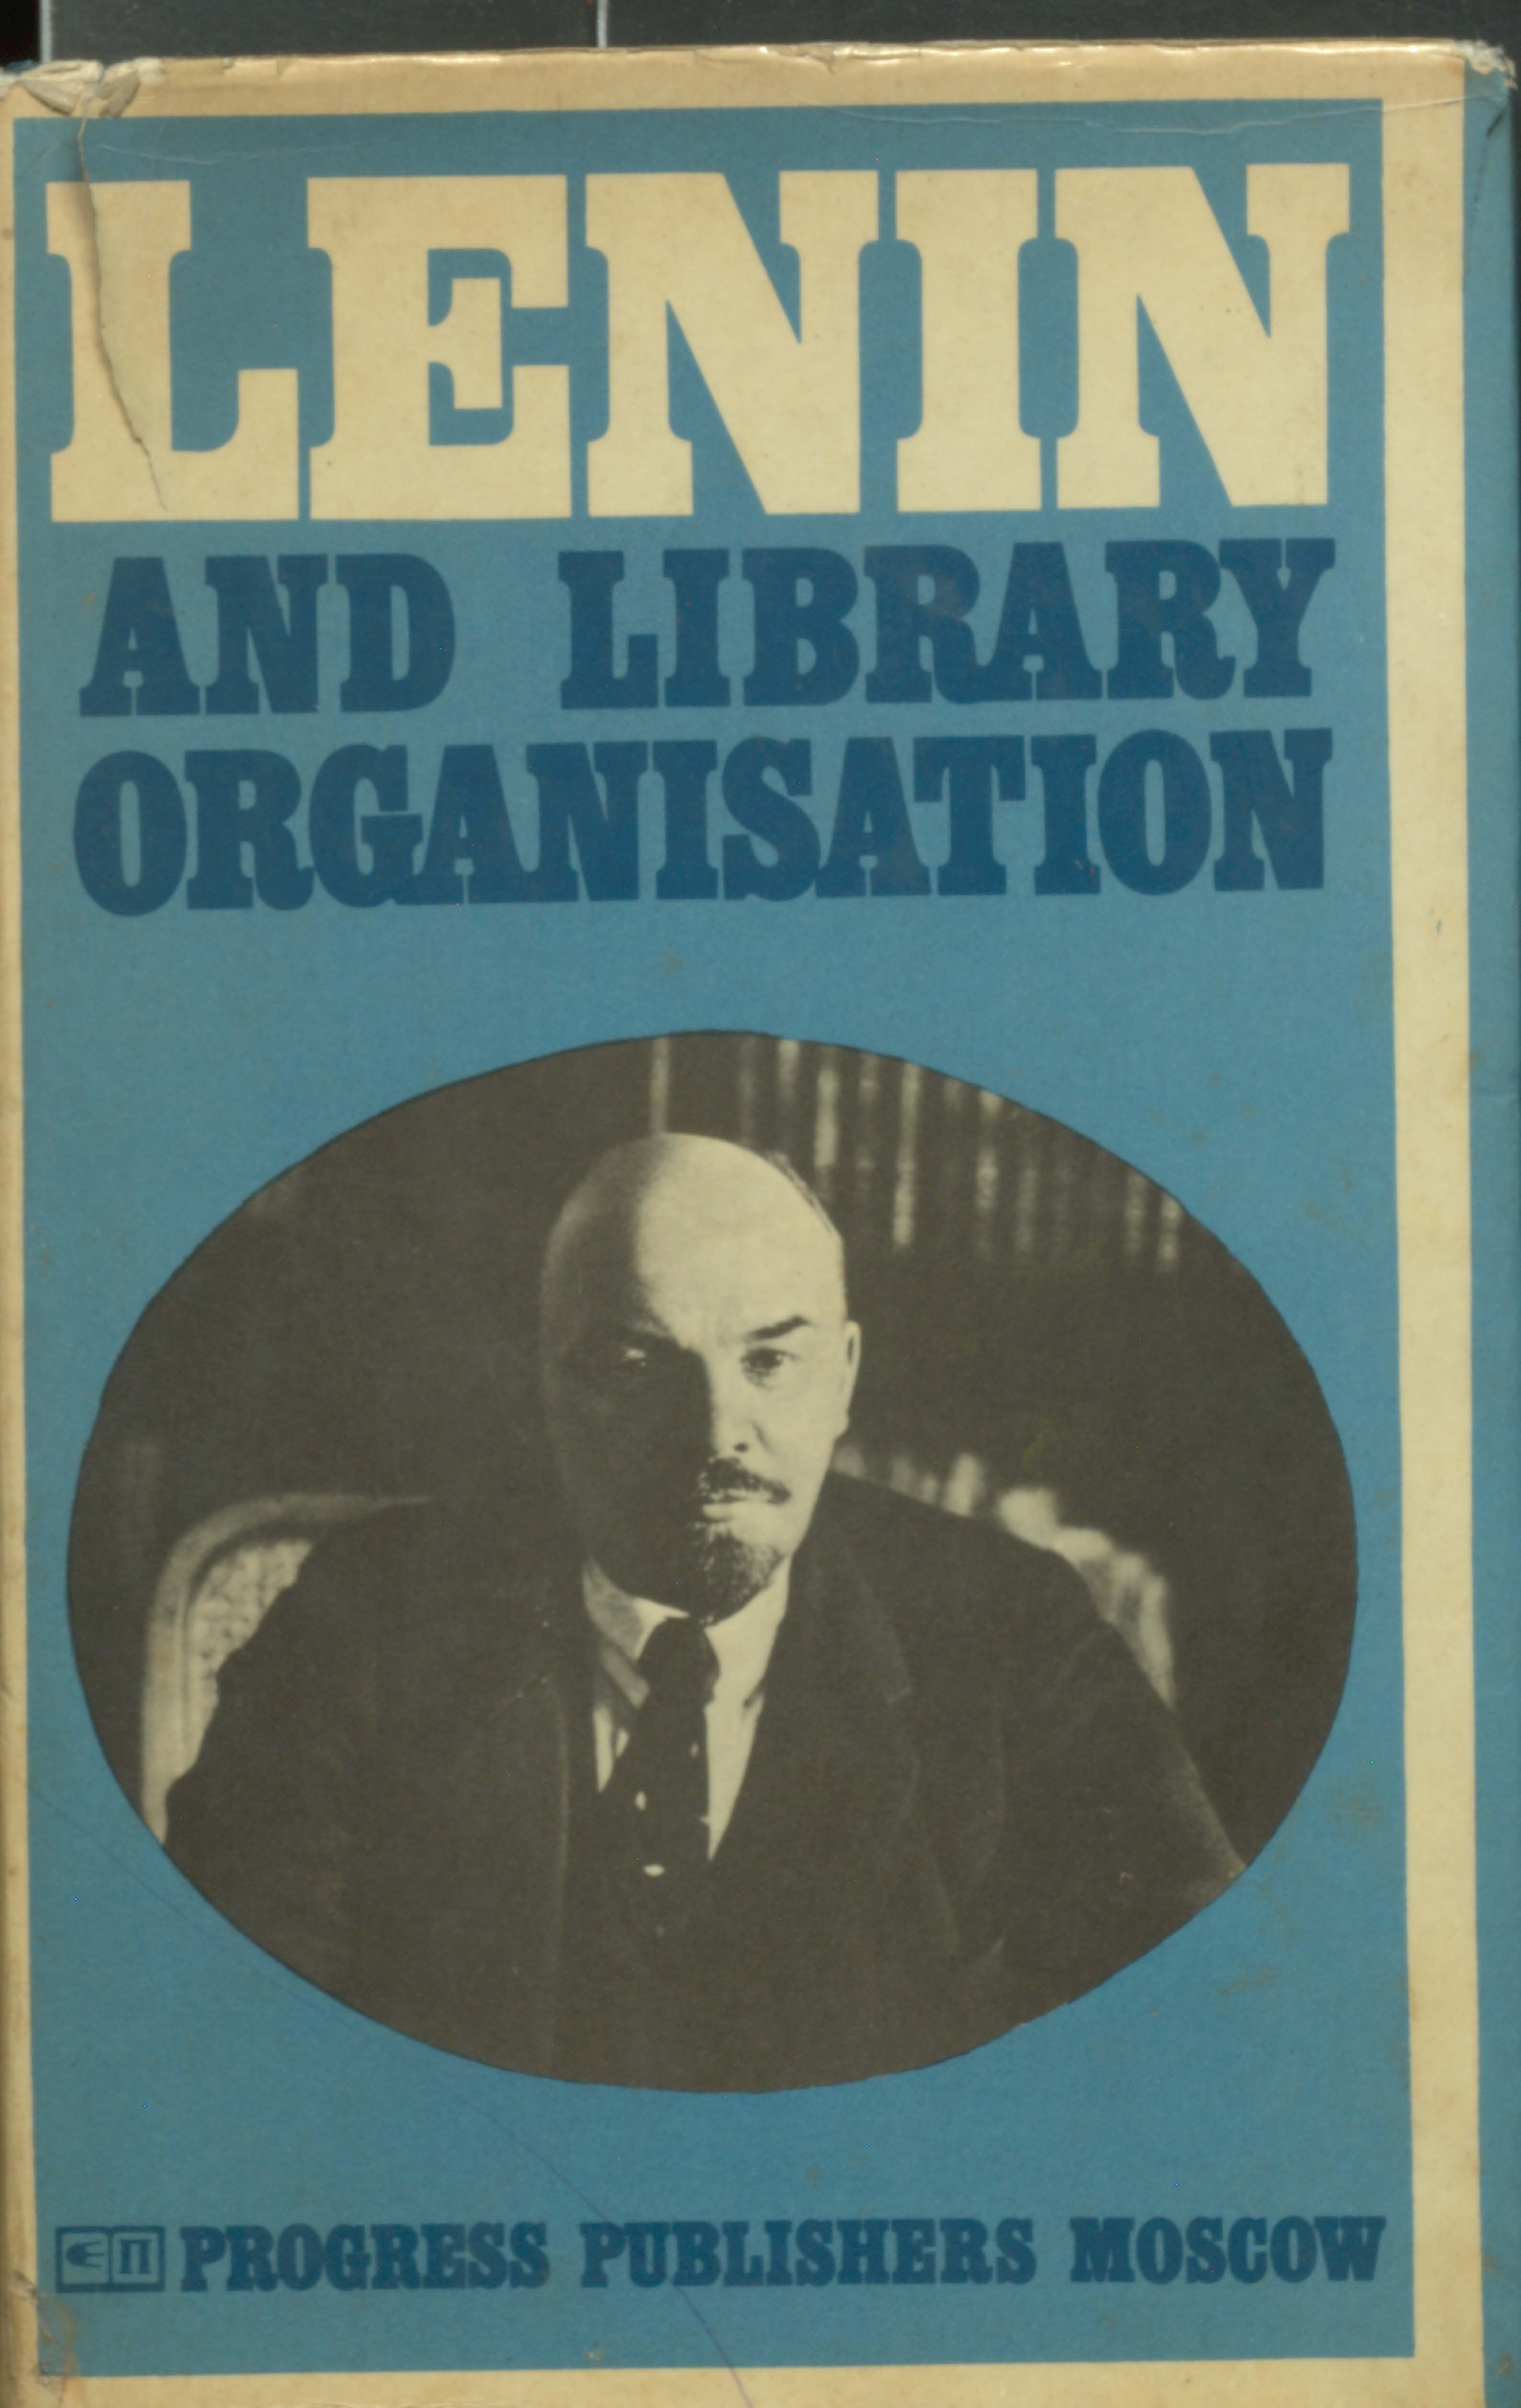 Lenin and library organisation